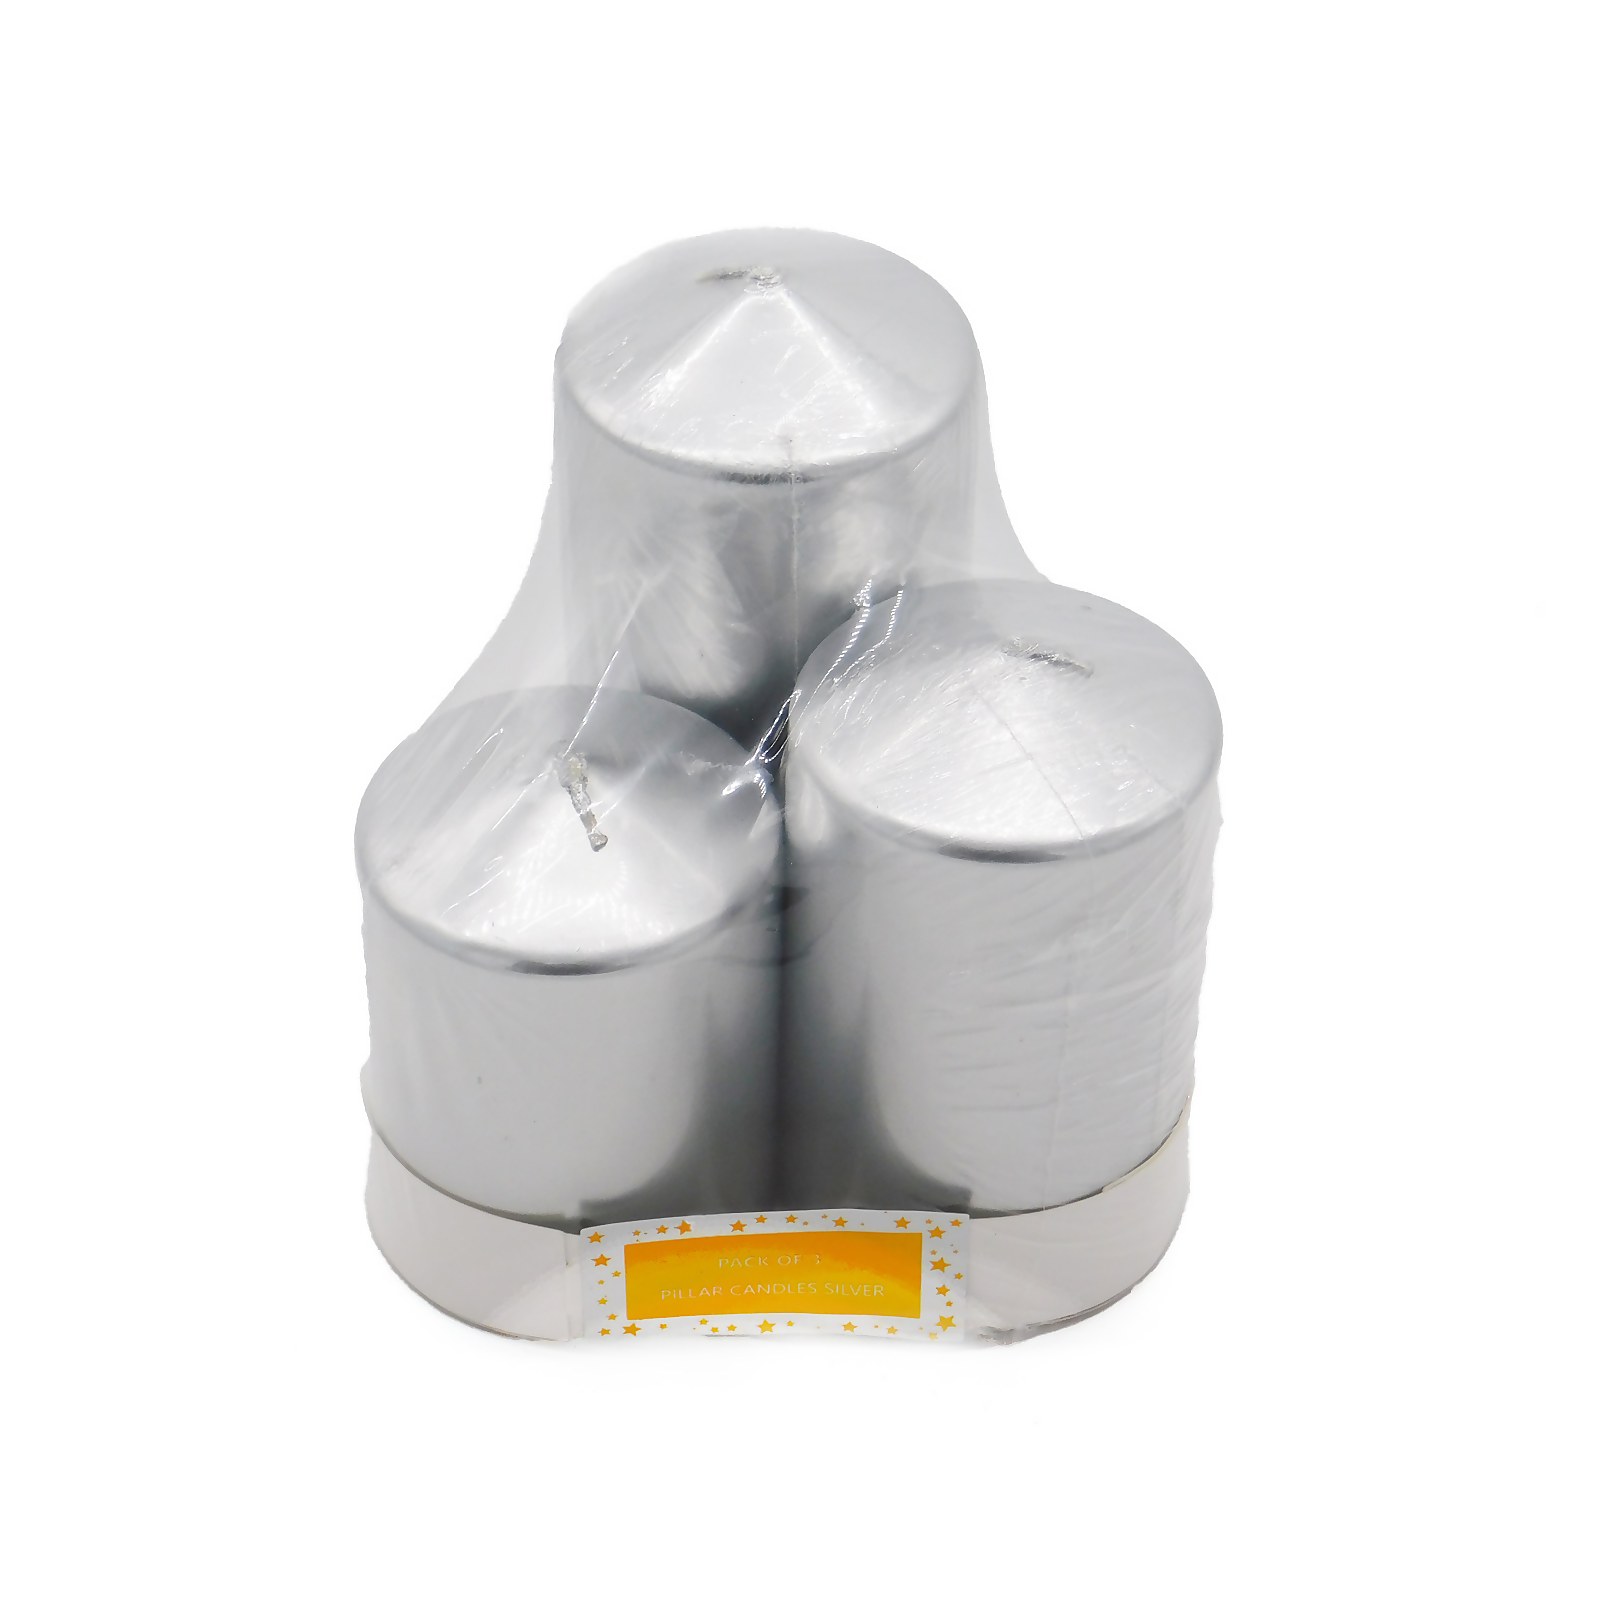 Photo of Silver Pillar Candles - 3 Pack